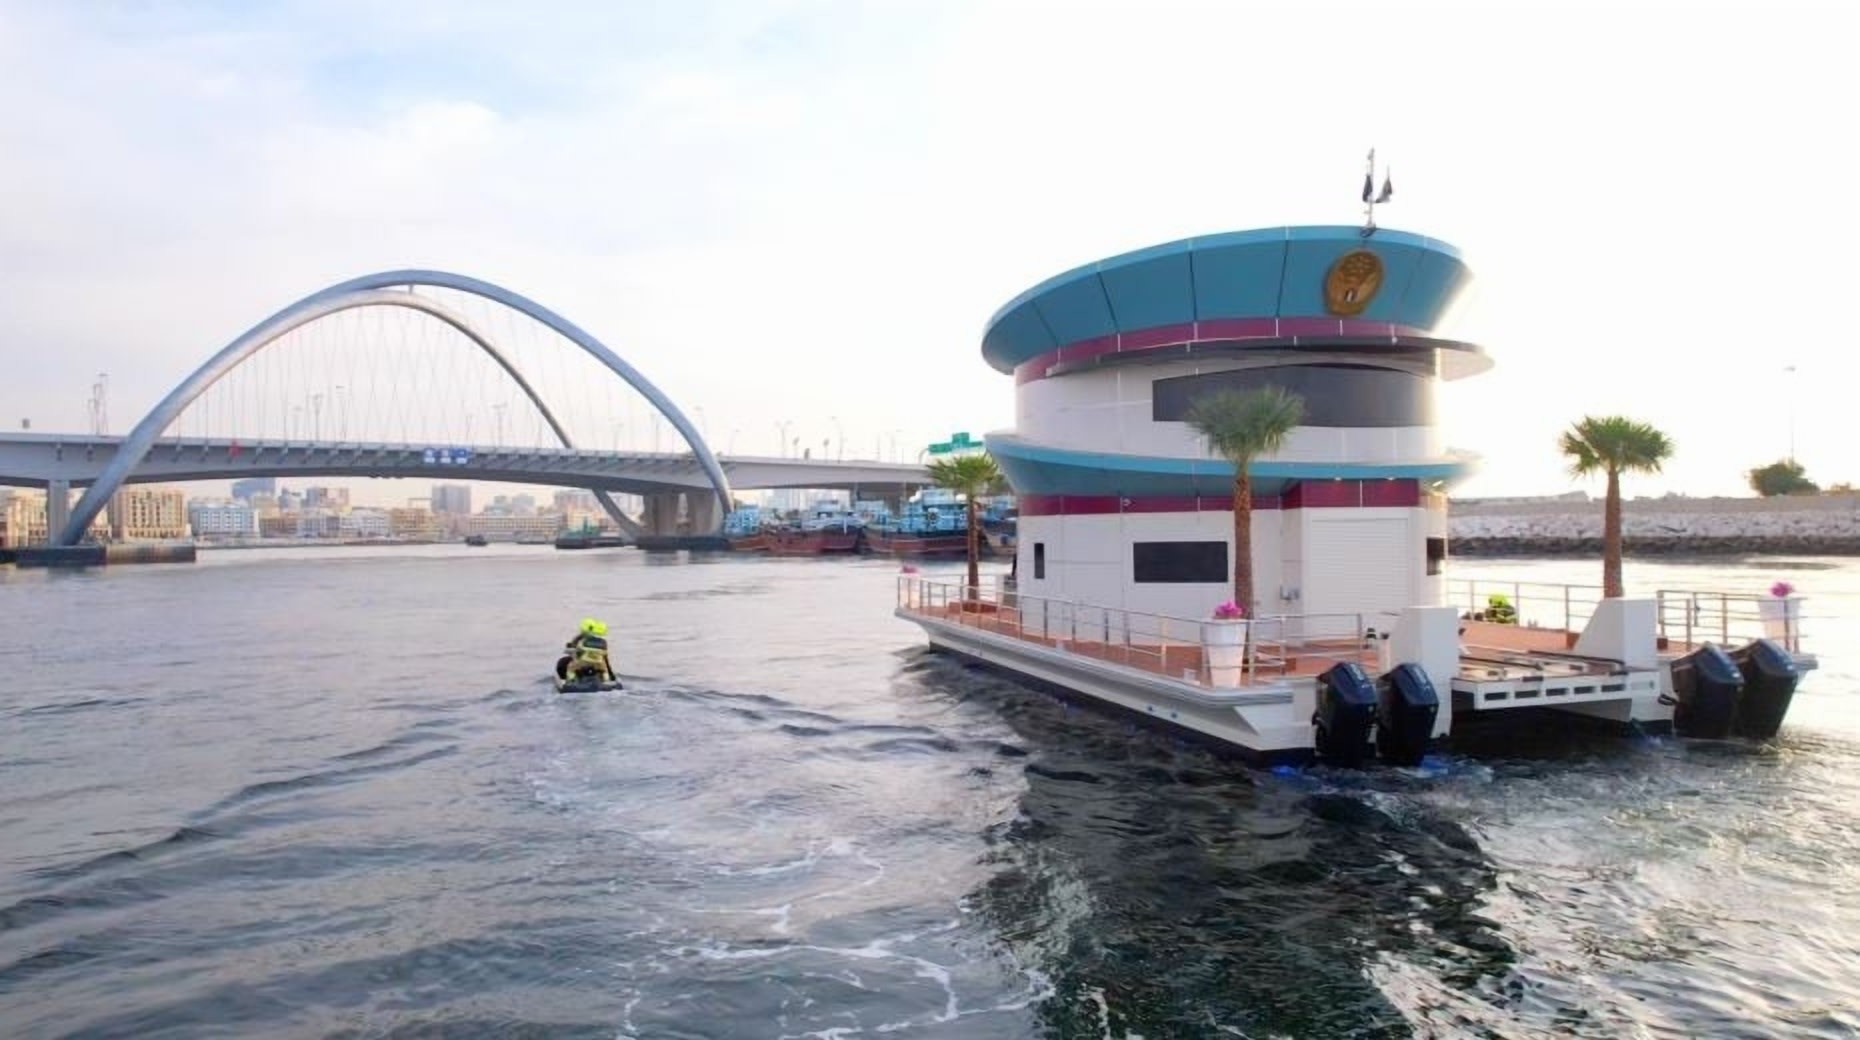 Dubai's First Sustainable Floating Fire Station